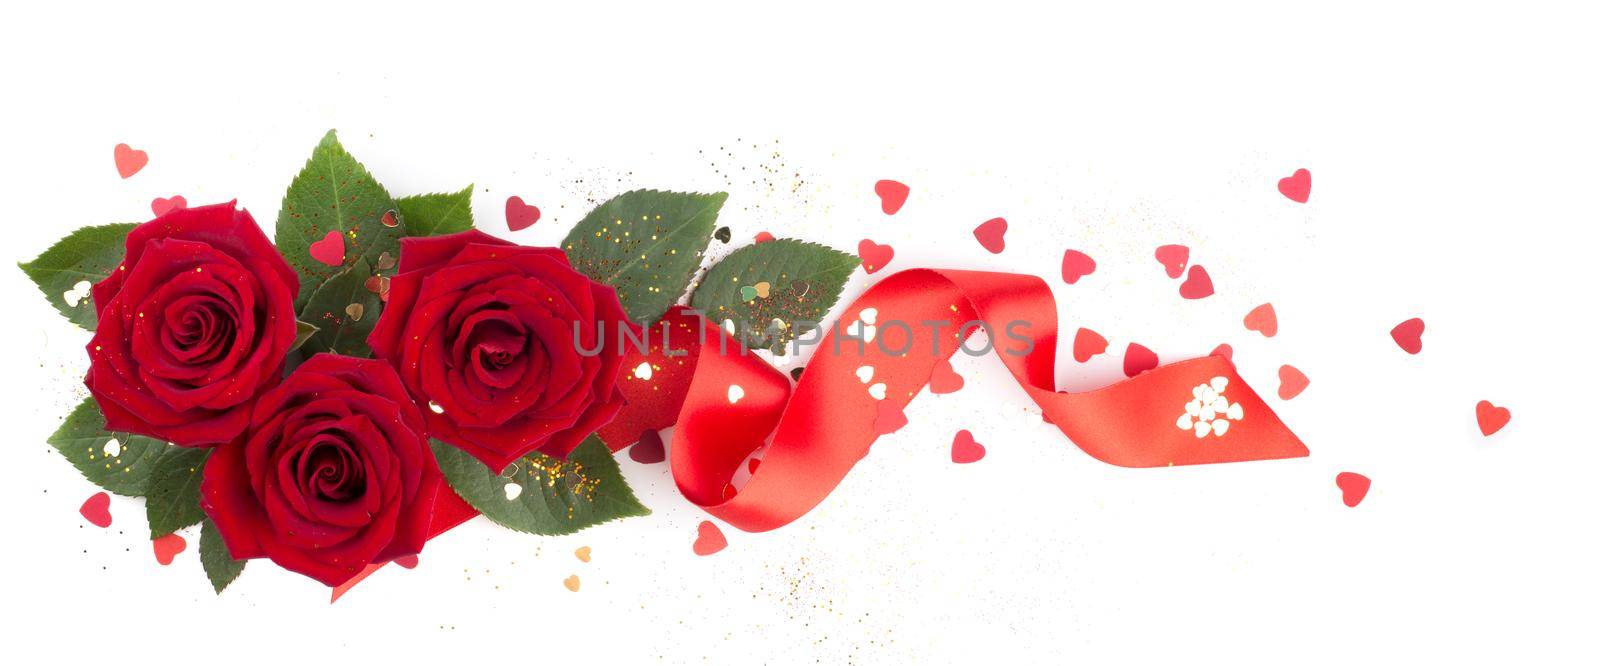 Red rose flowers leaves hearts and ribbon arrangement isolated on white background, top view, design element for Valentines day